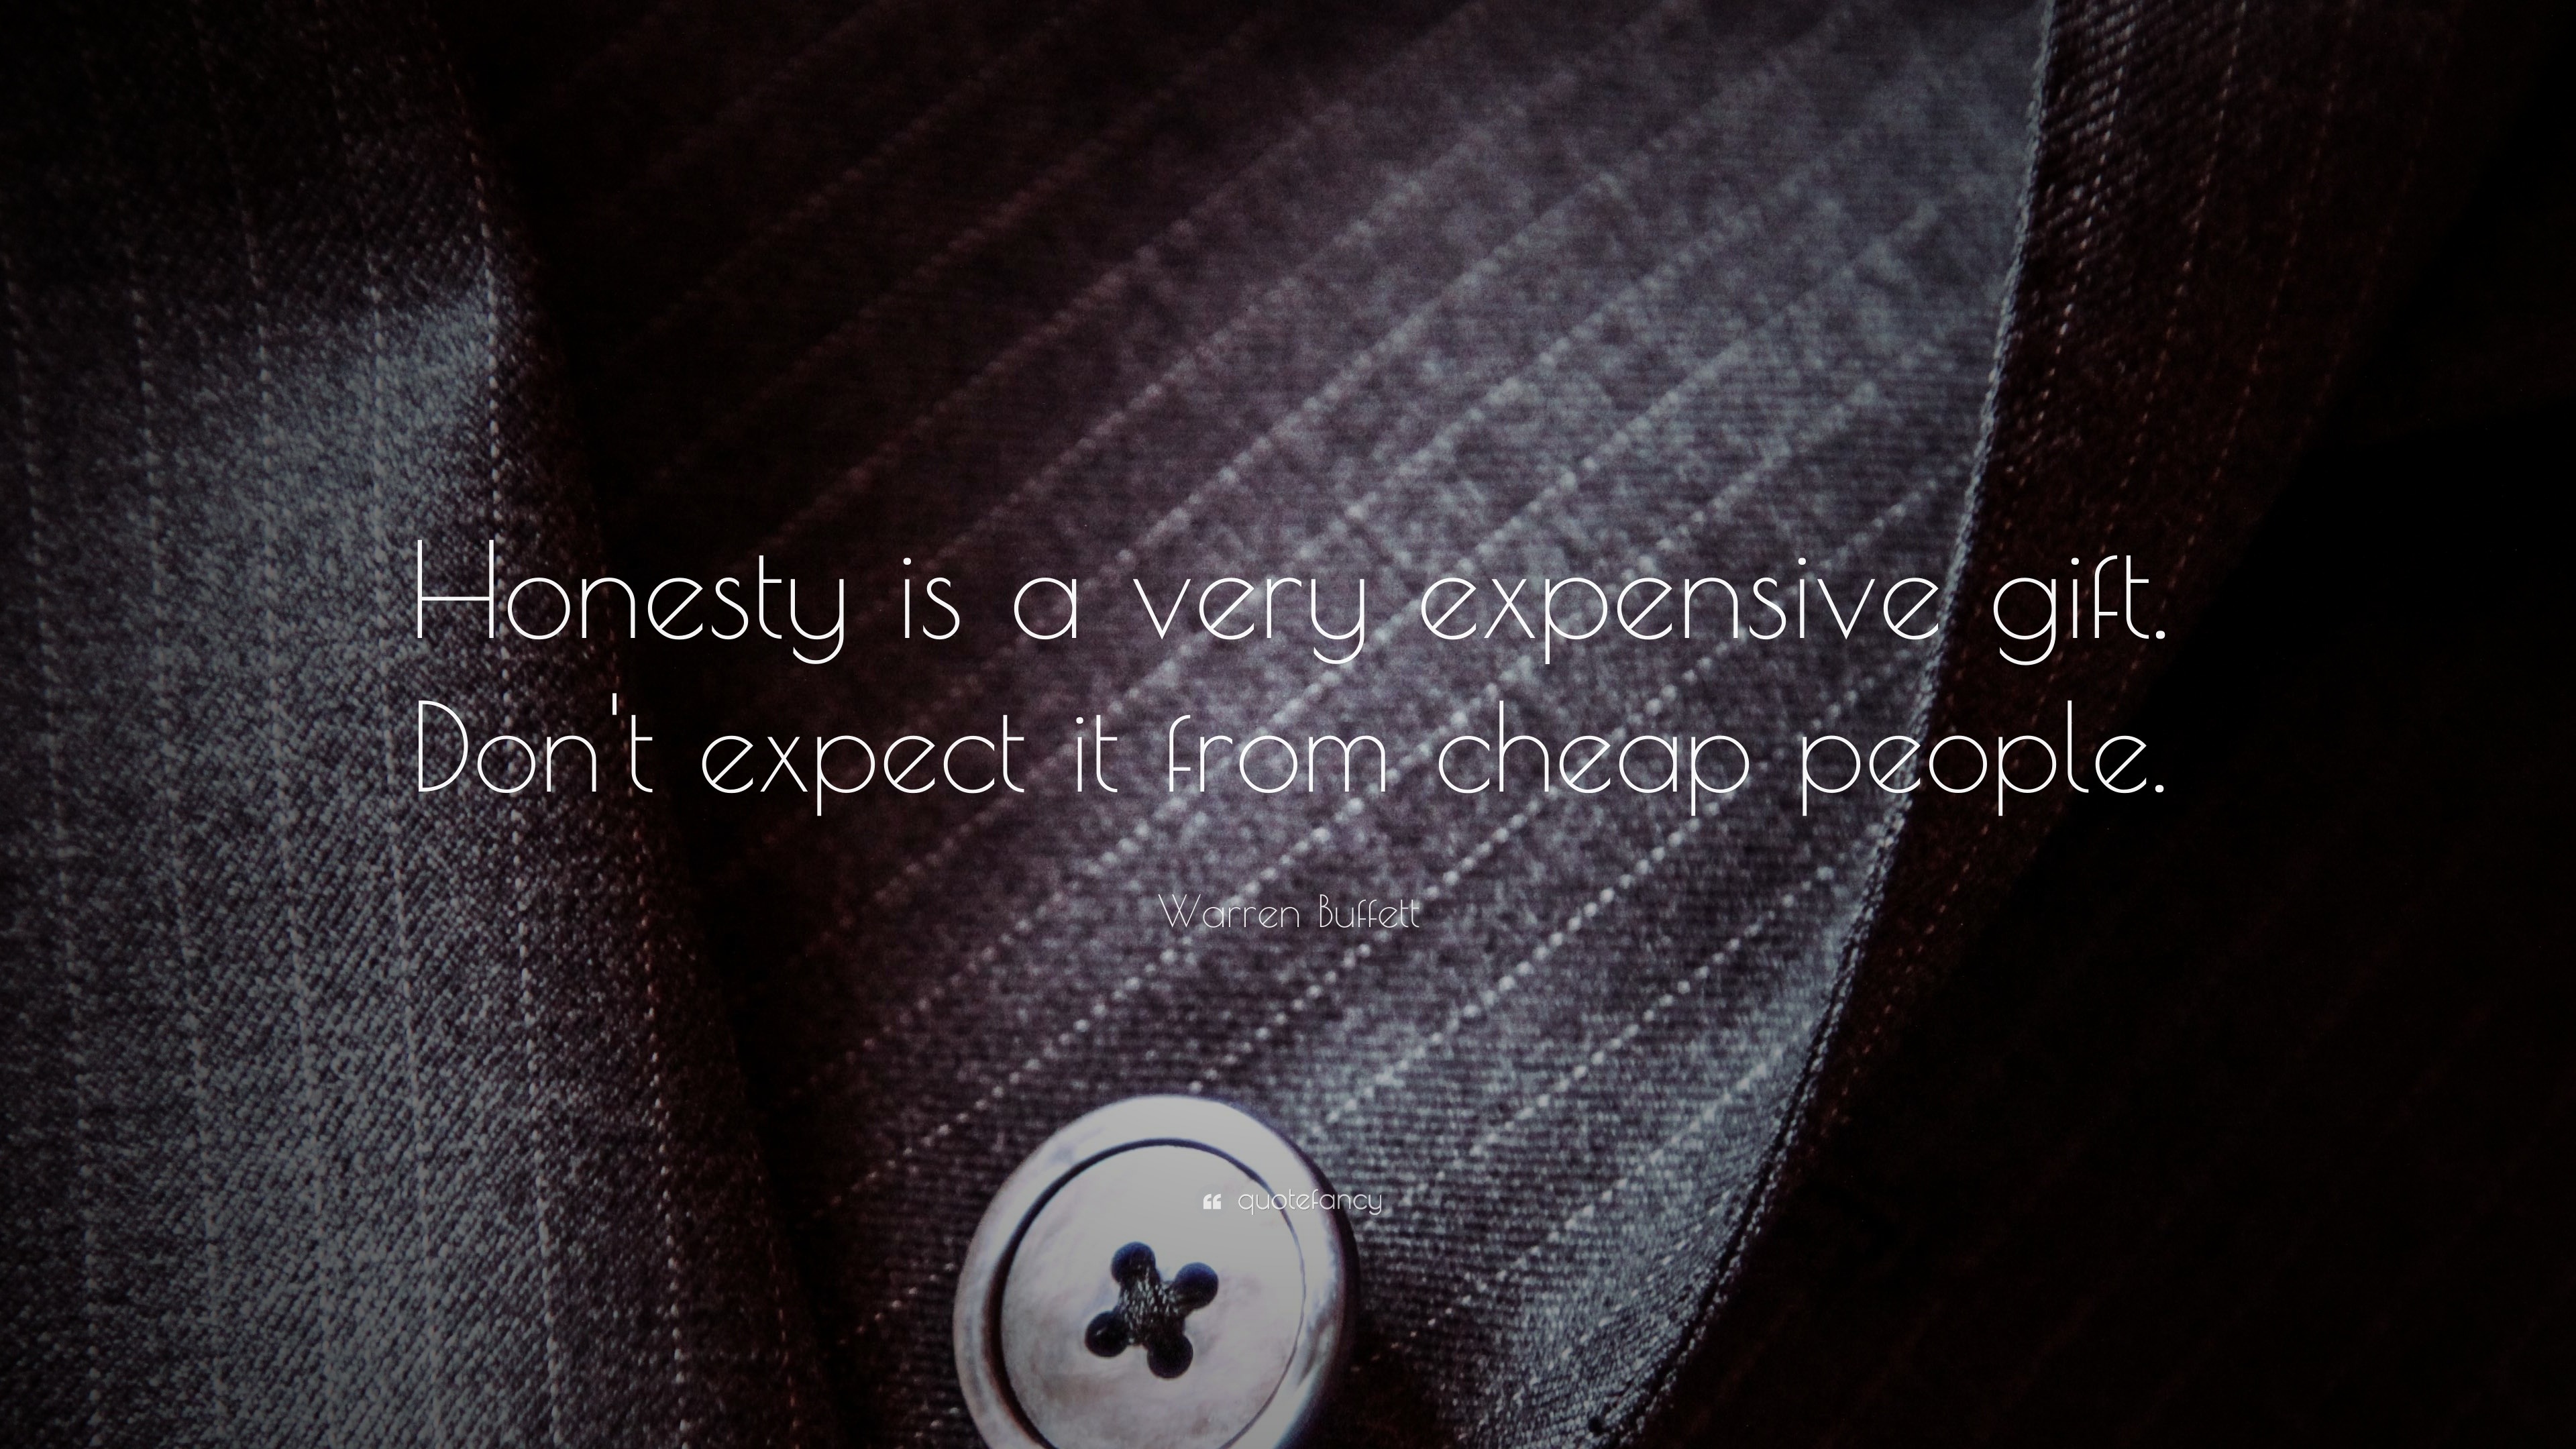 Honesty is a very expensive gift - Mesmerizing Quotes